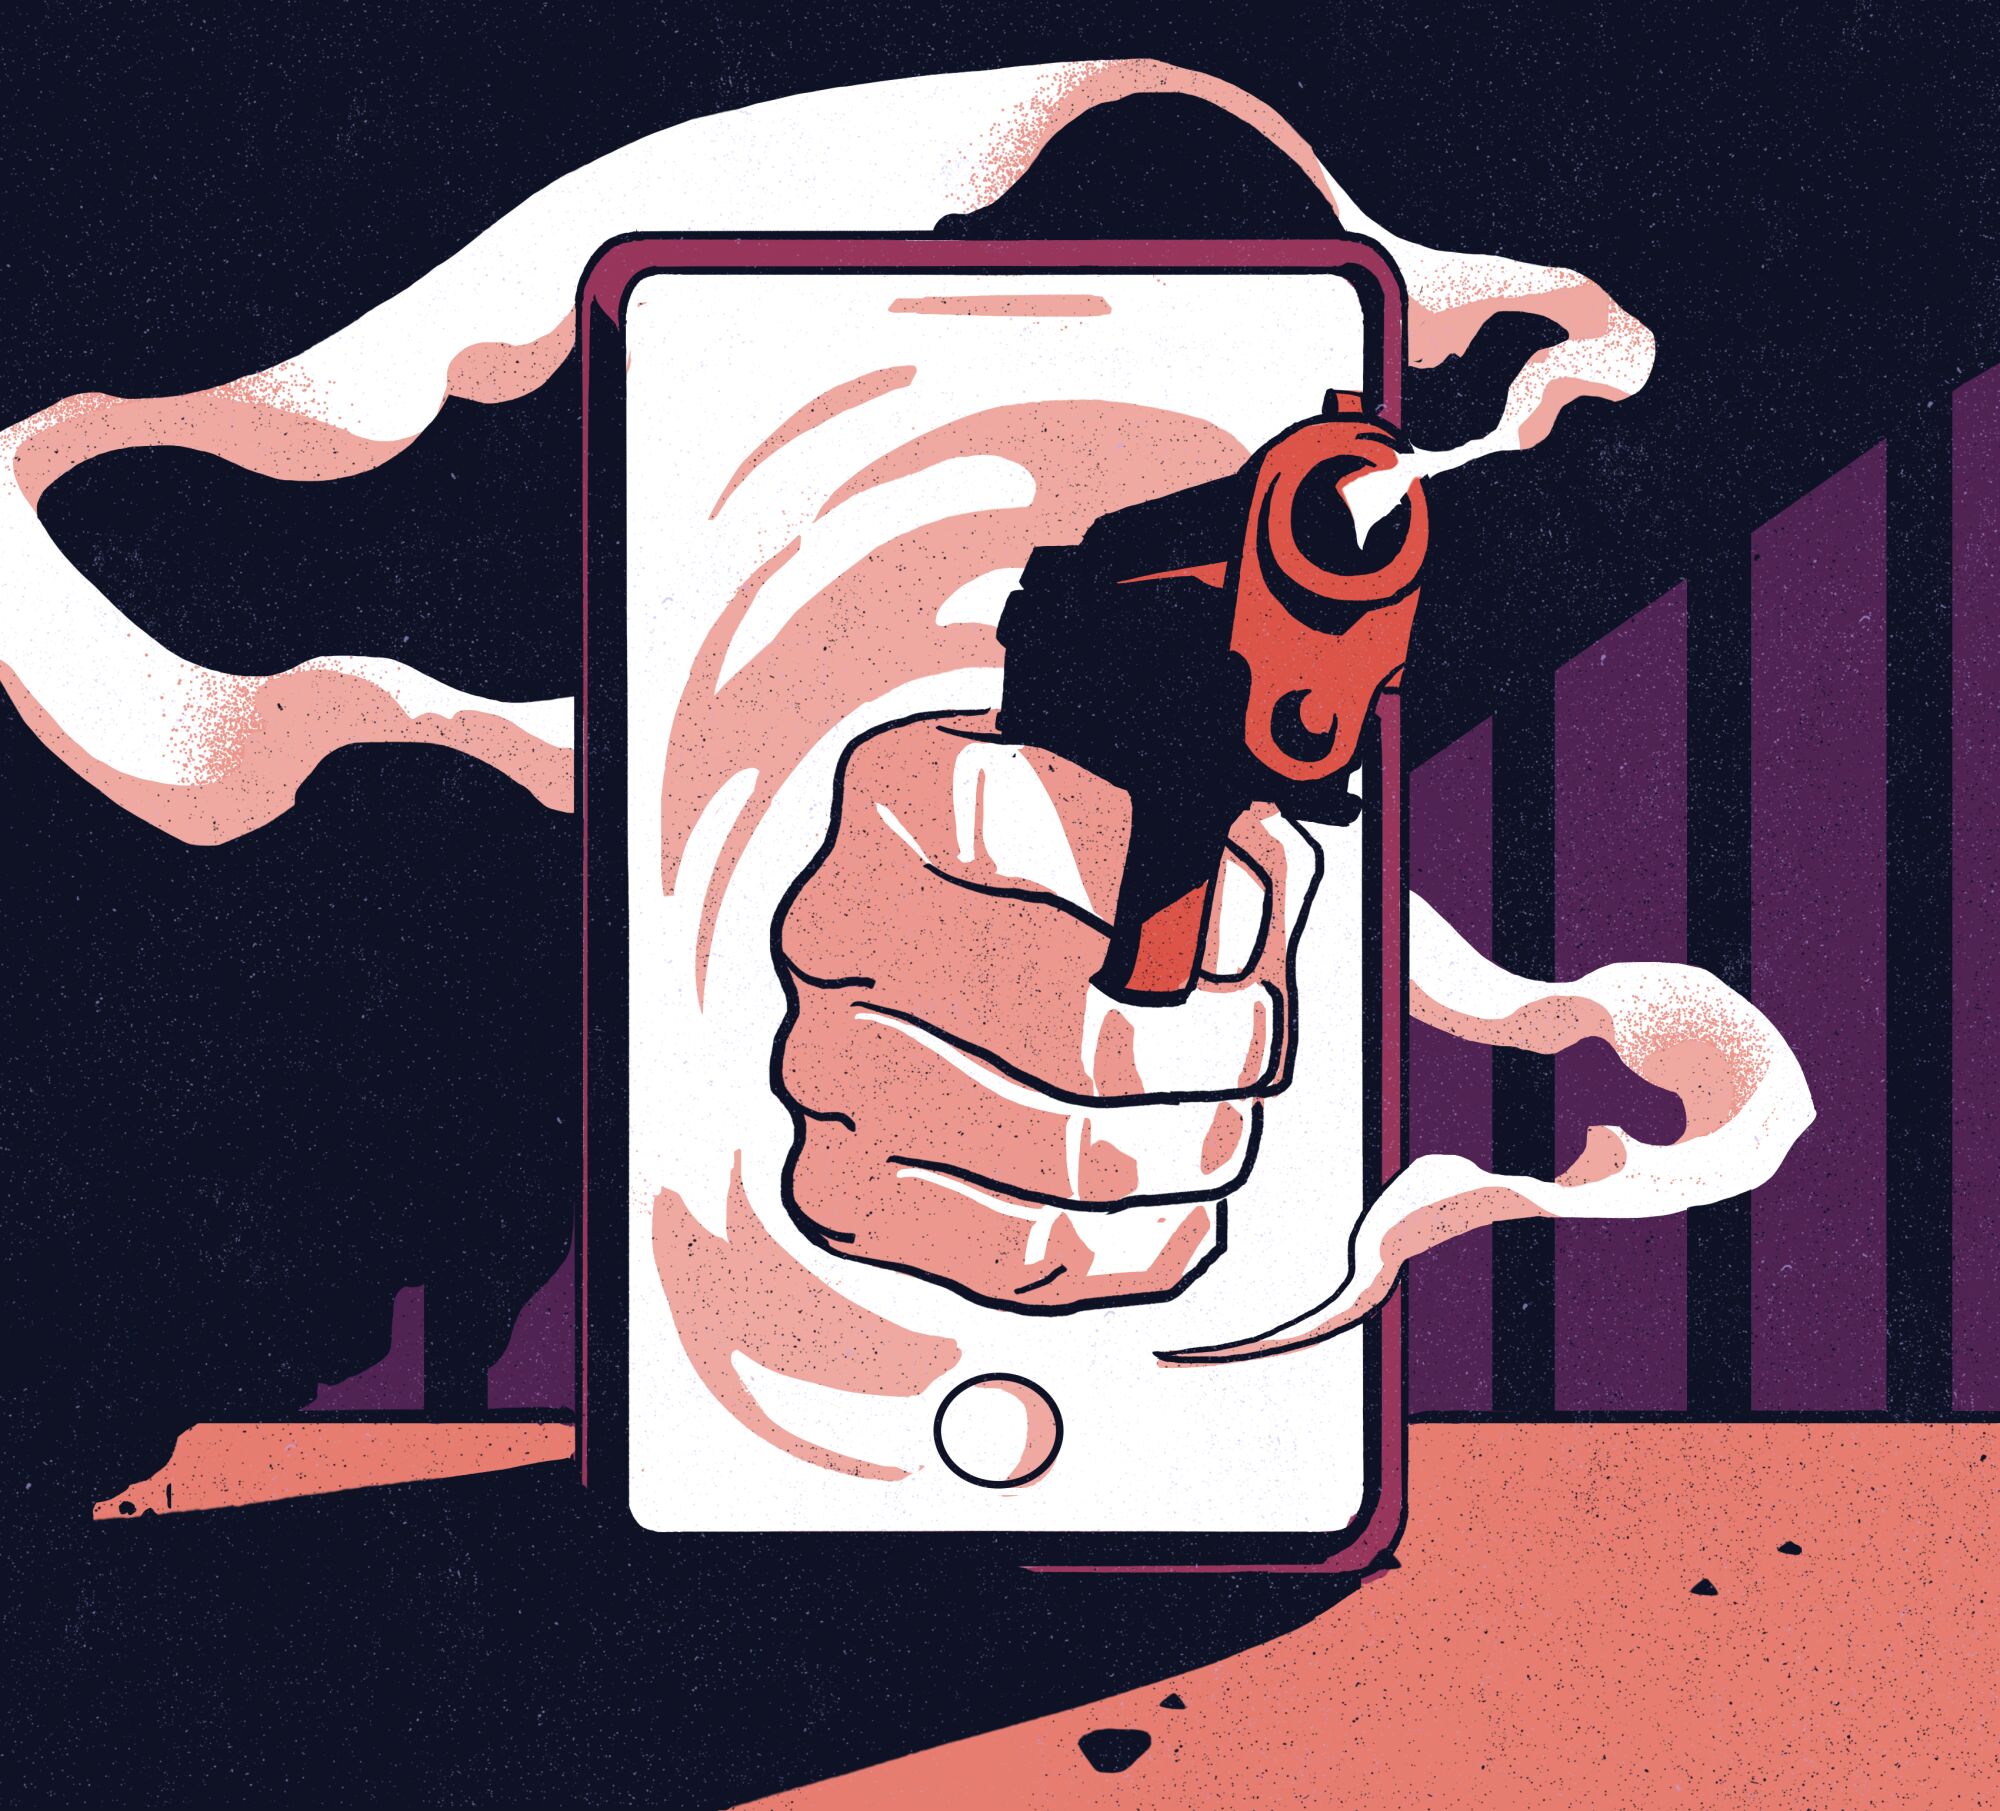 An illustration of a hand firing a gun coming out of a cellphone with prison bars in the background.